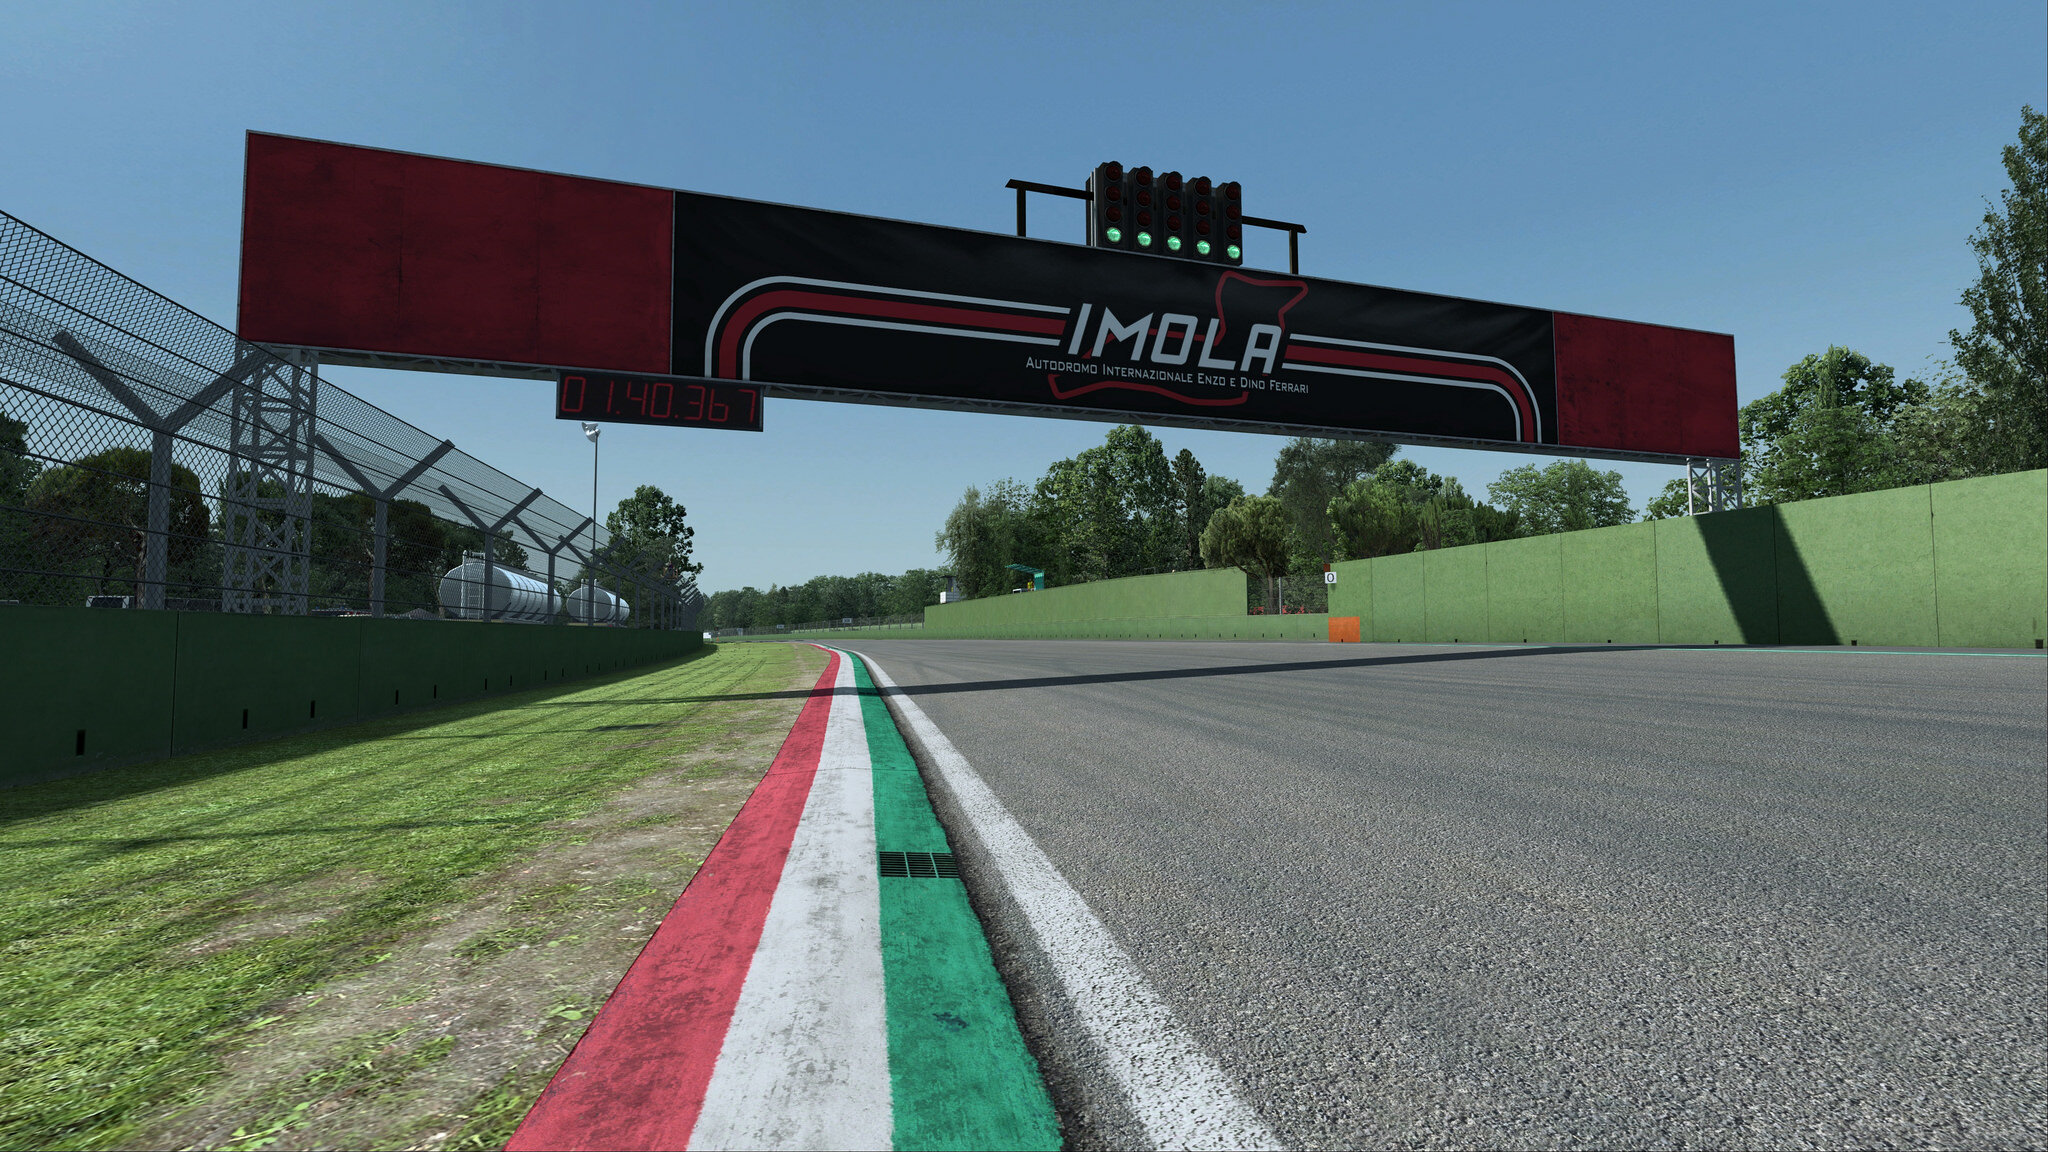 More information about "Le Mans Ultimate: prossimo update a Giugno, Imola in arrivo..."